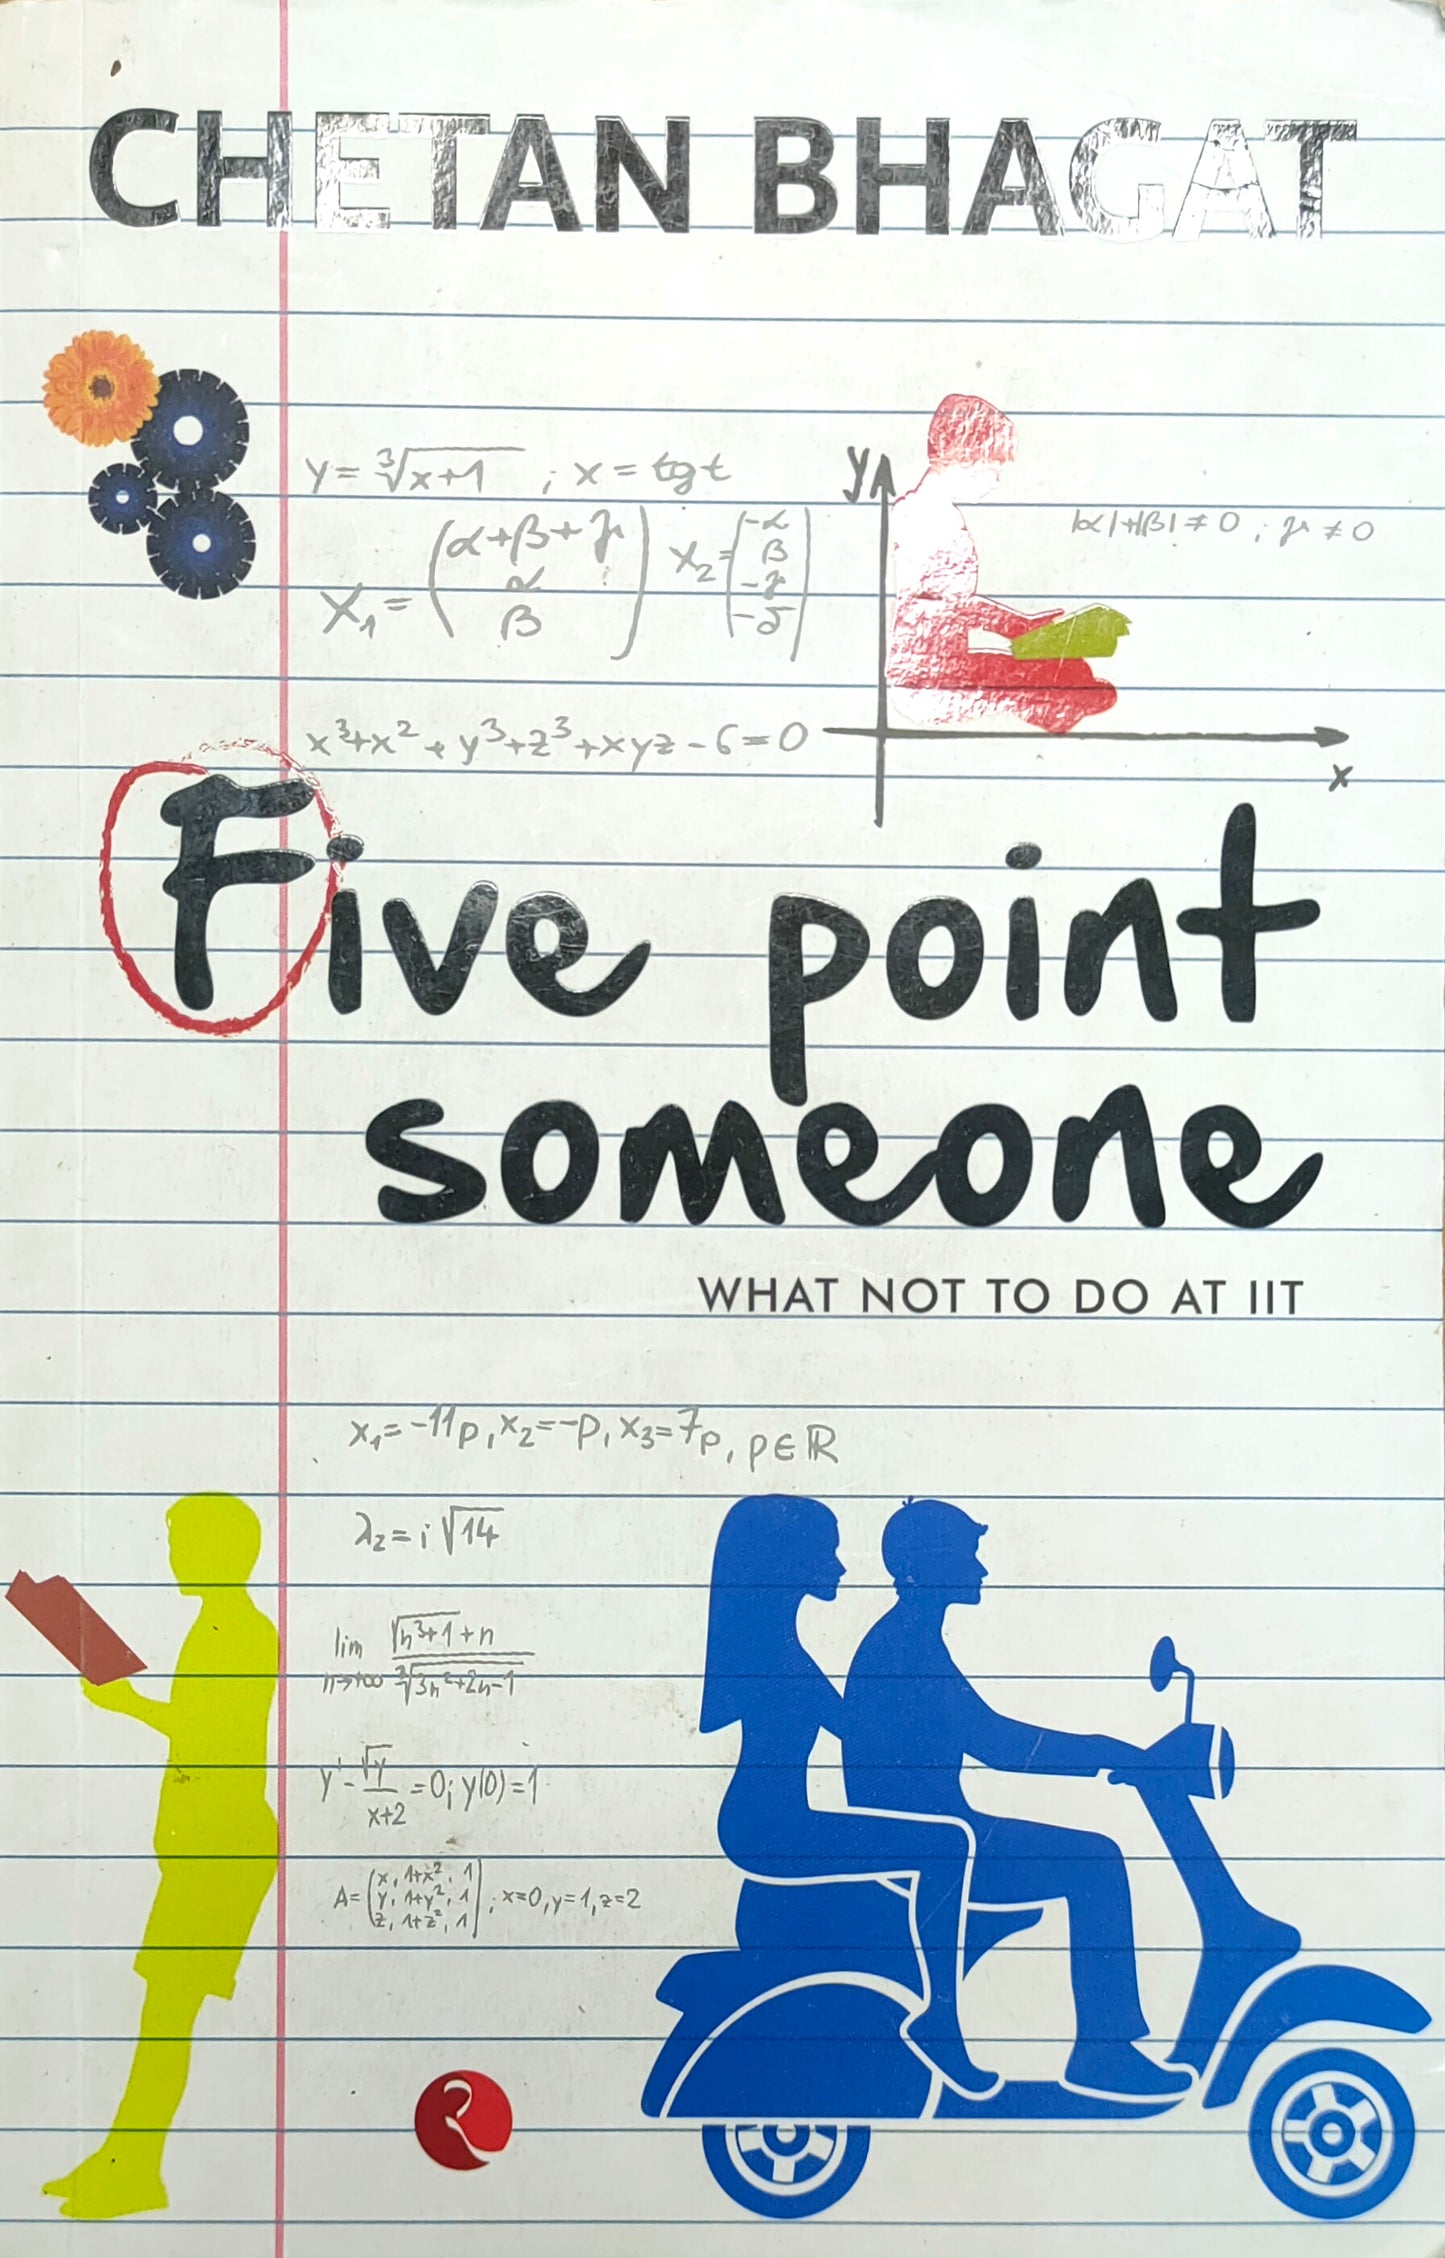 Five point someone